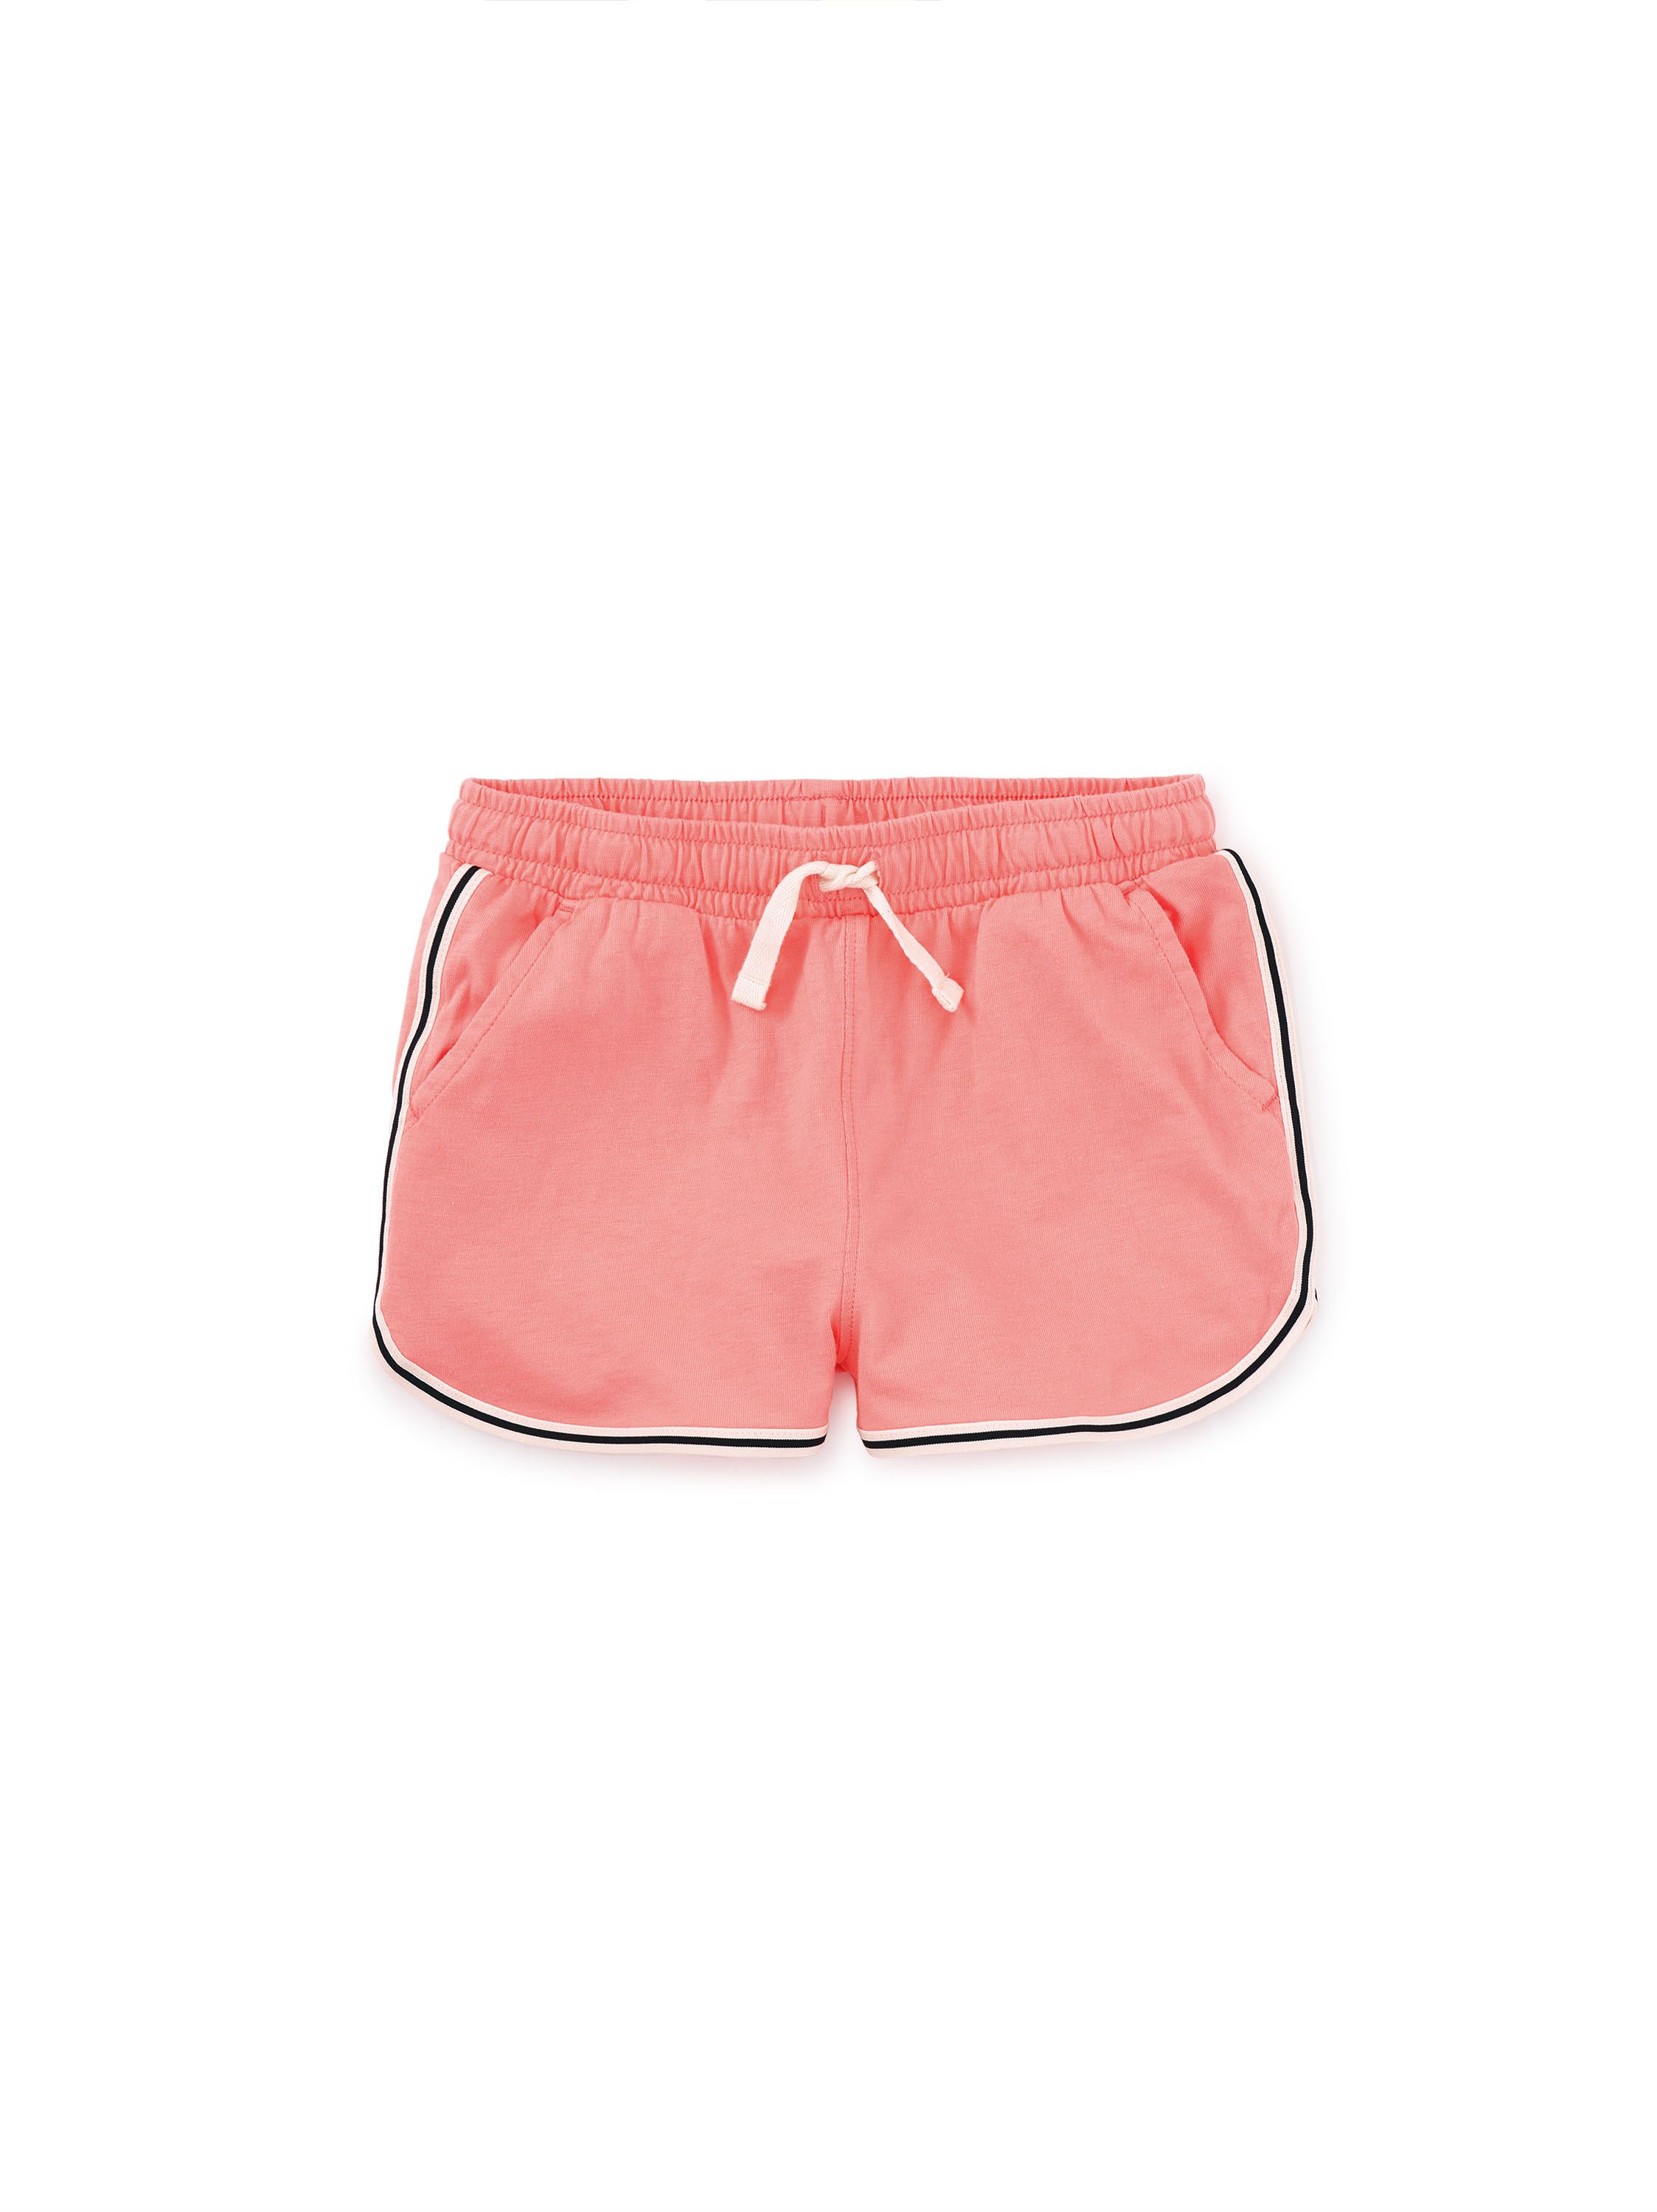 Striped Binding Track Shorts | Tea Collection